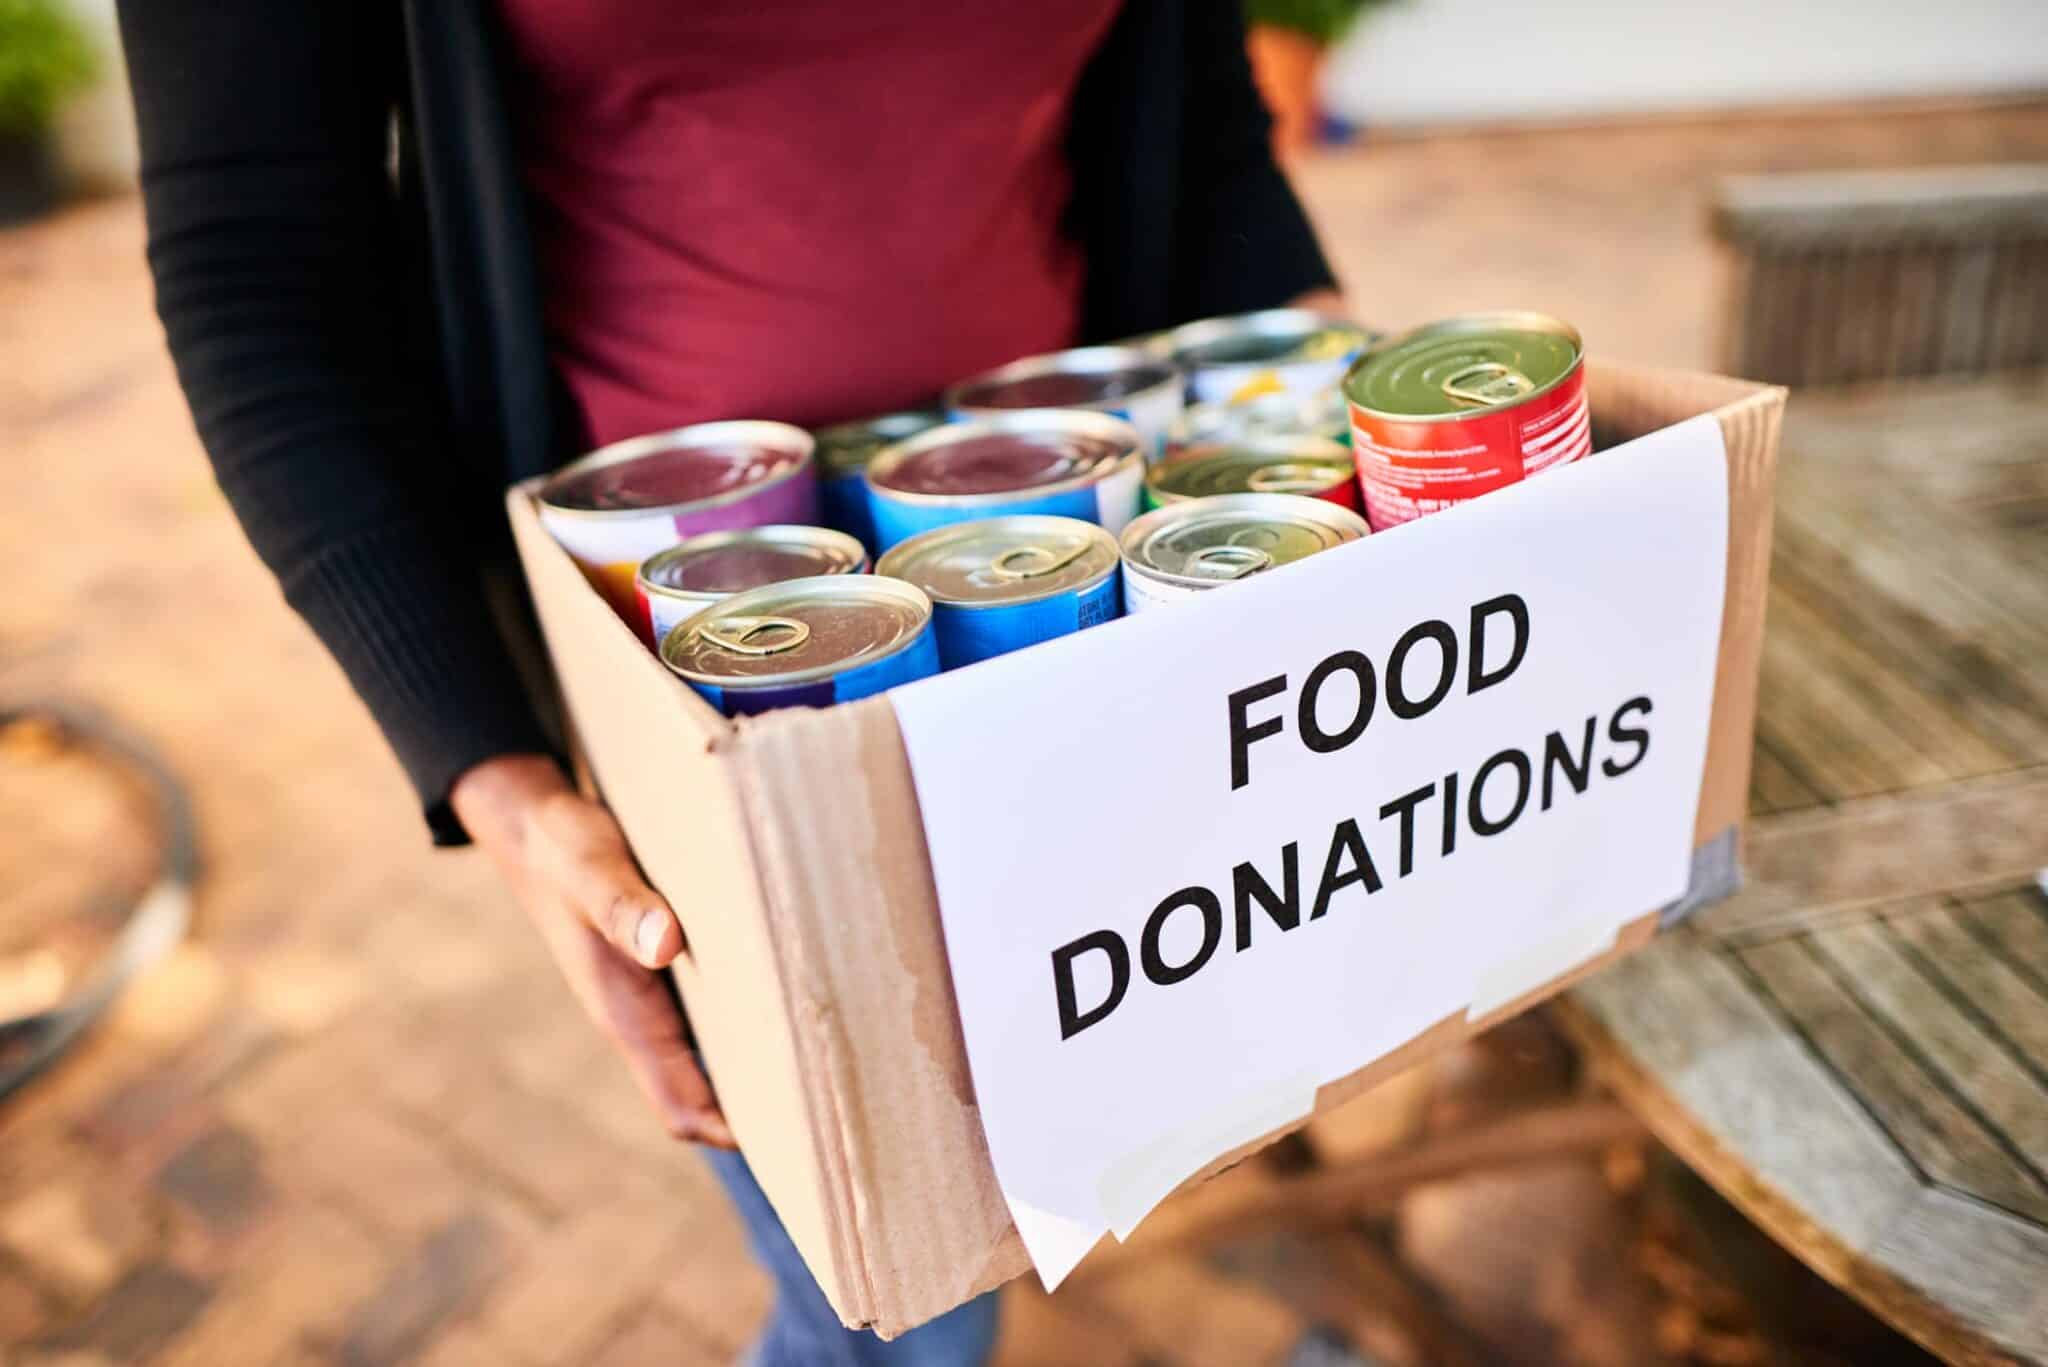 A woman holding a box of food donations.